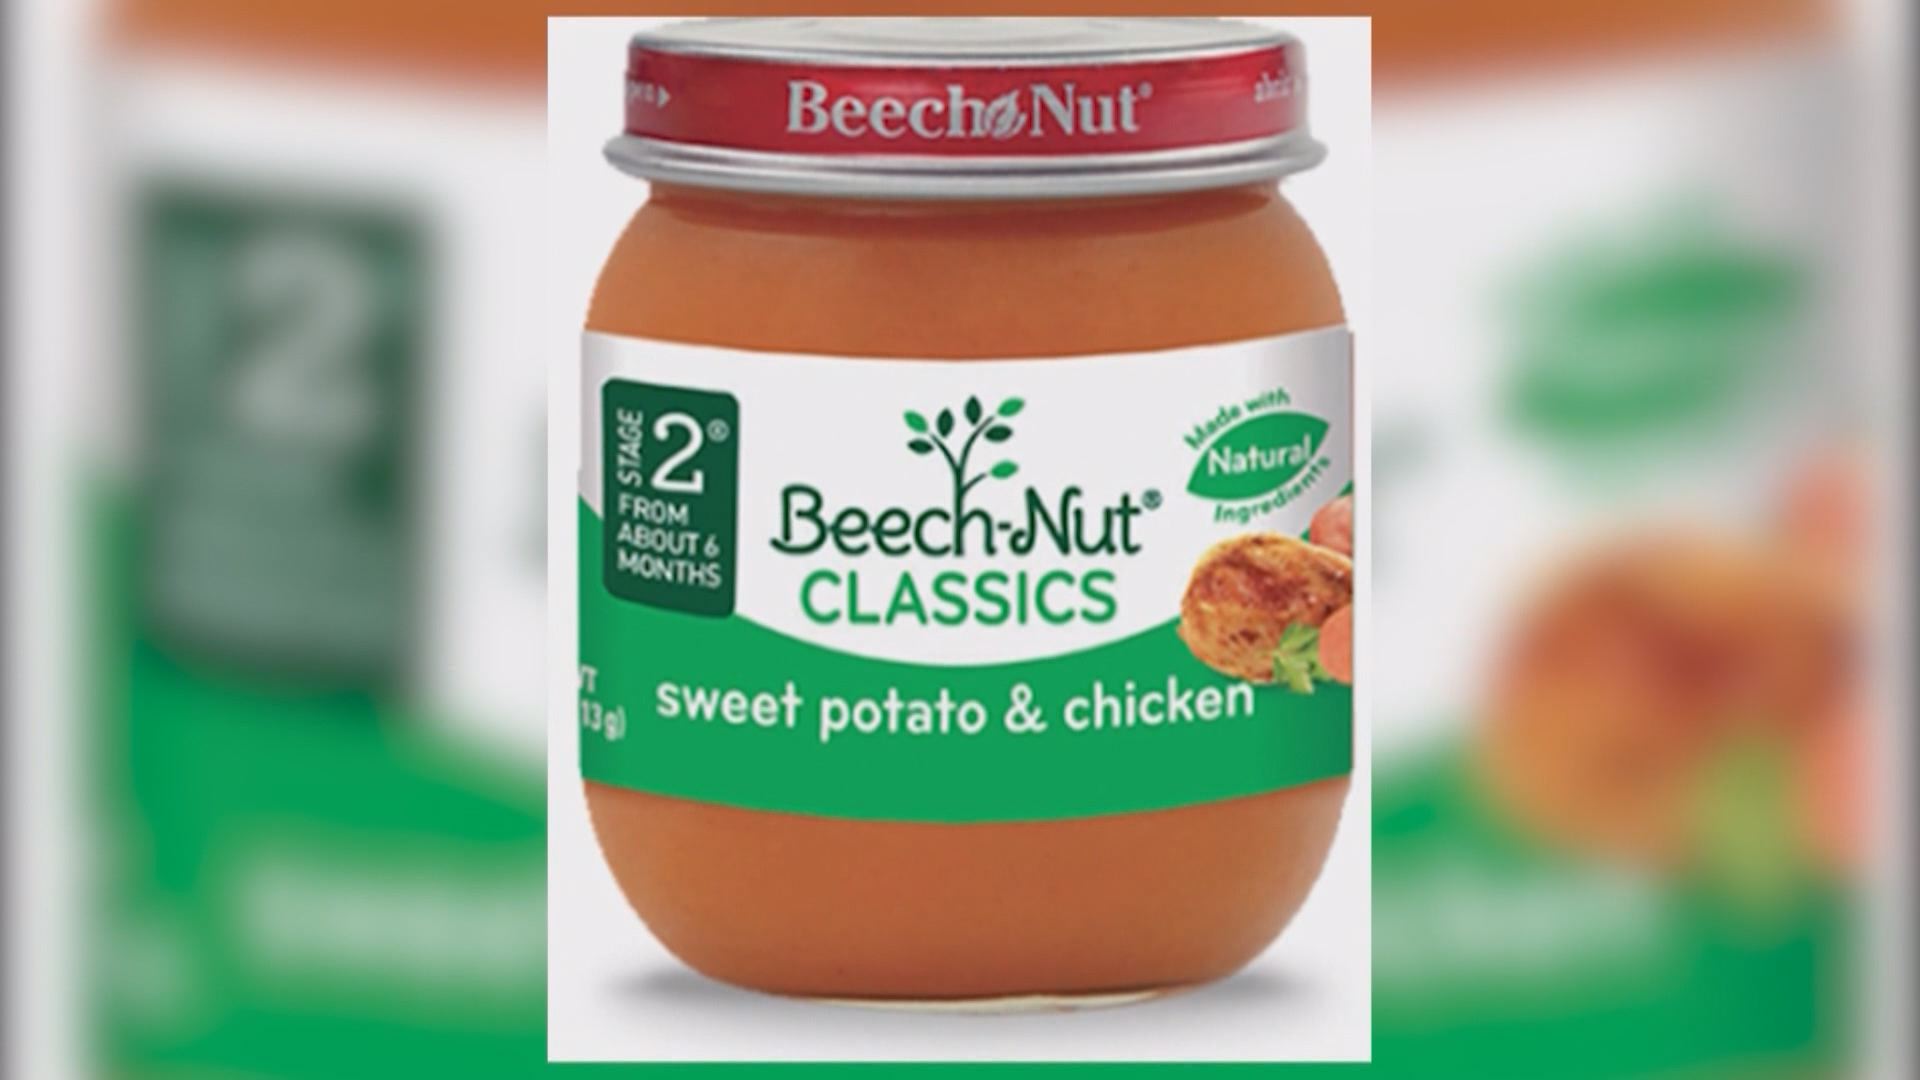 BeechNut Nutrition recalls more than 1,900 lbs of baby food